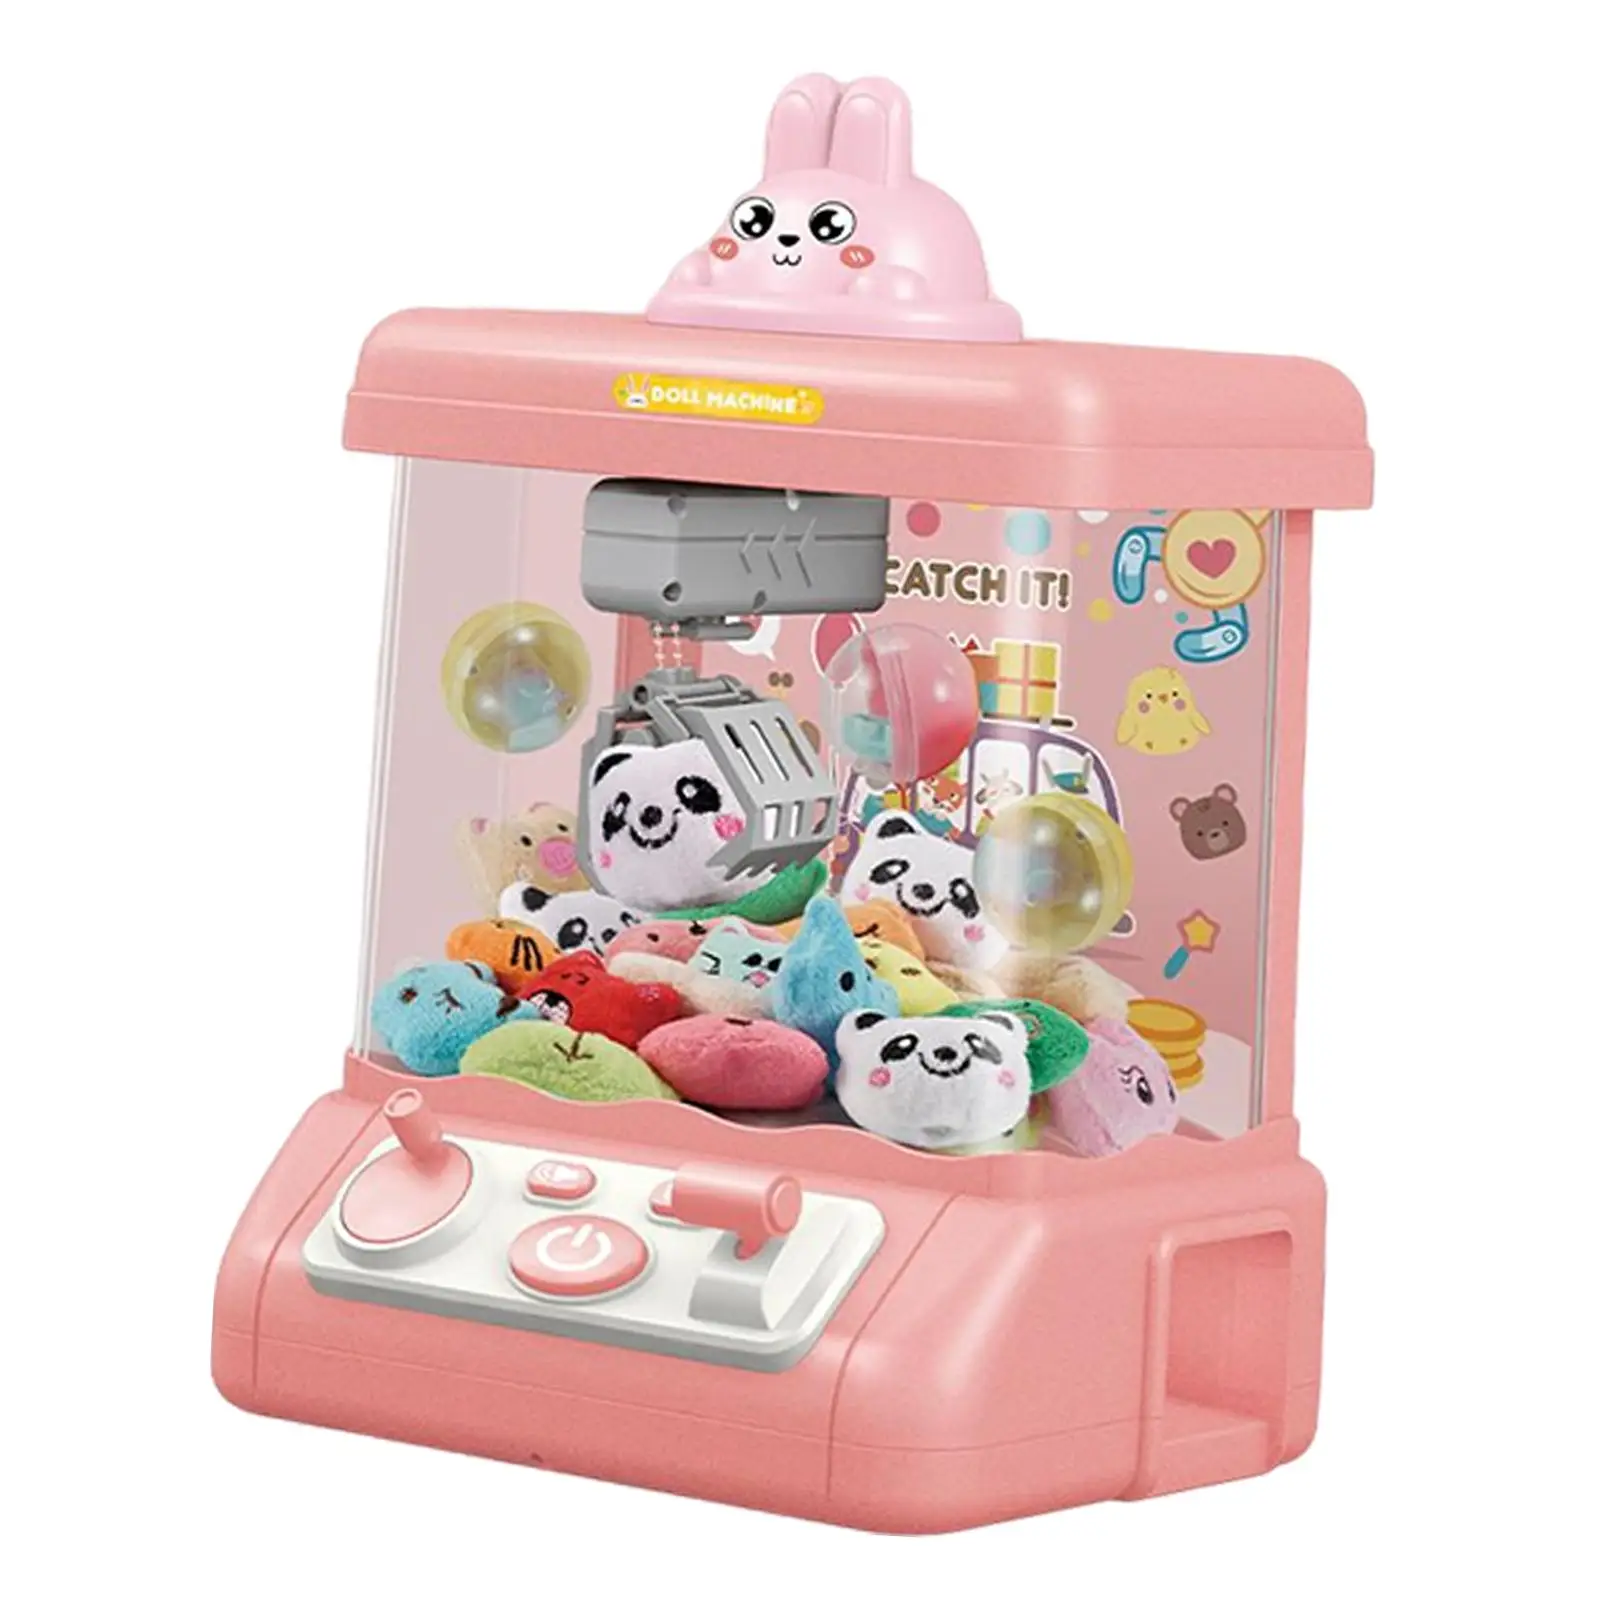 Small Claw Machine with Lights and Sound Miniature Doll Machine diy Catching Doll Machine Slot Machine for Birthday Gifts